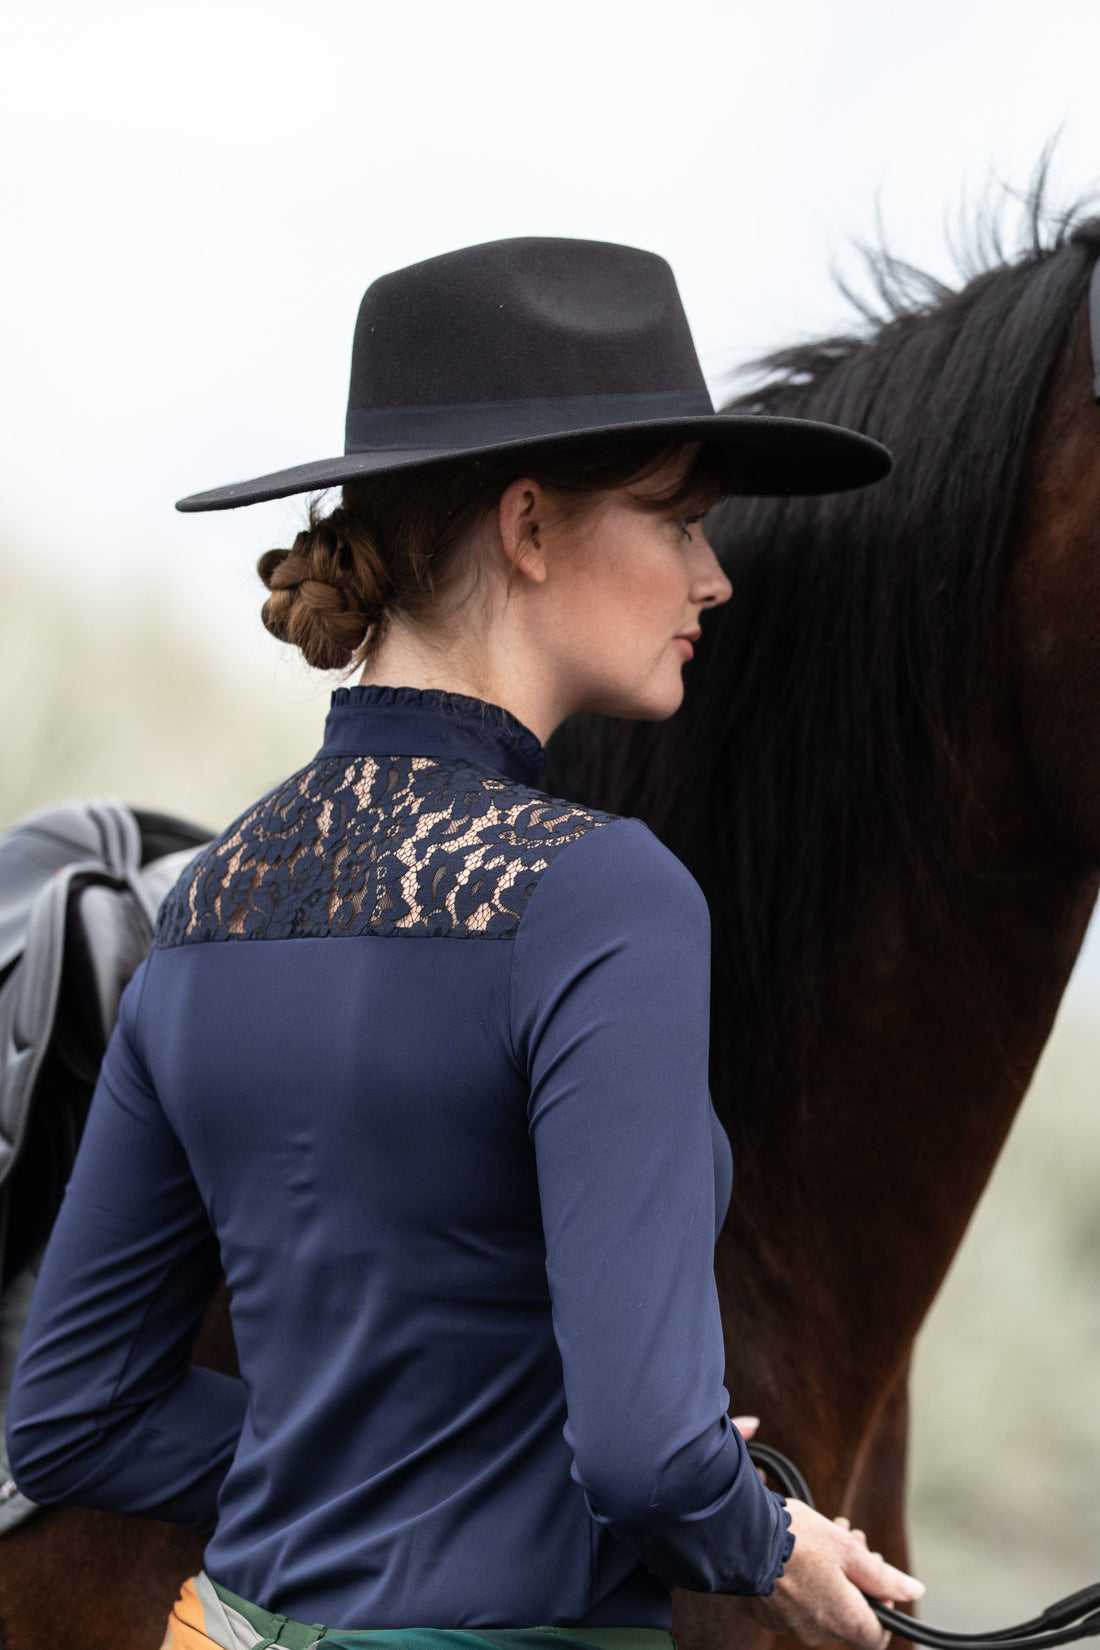 Equestrian Clothing Sale. Discounted Horse Riding Apparel Spring